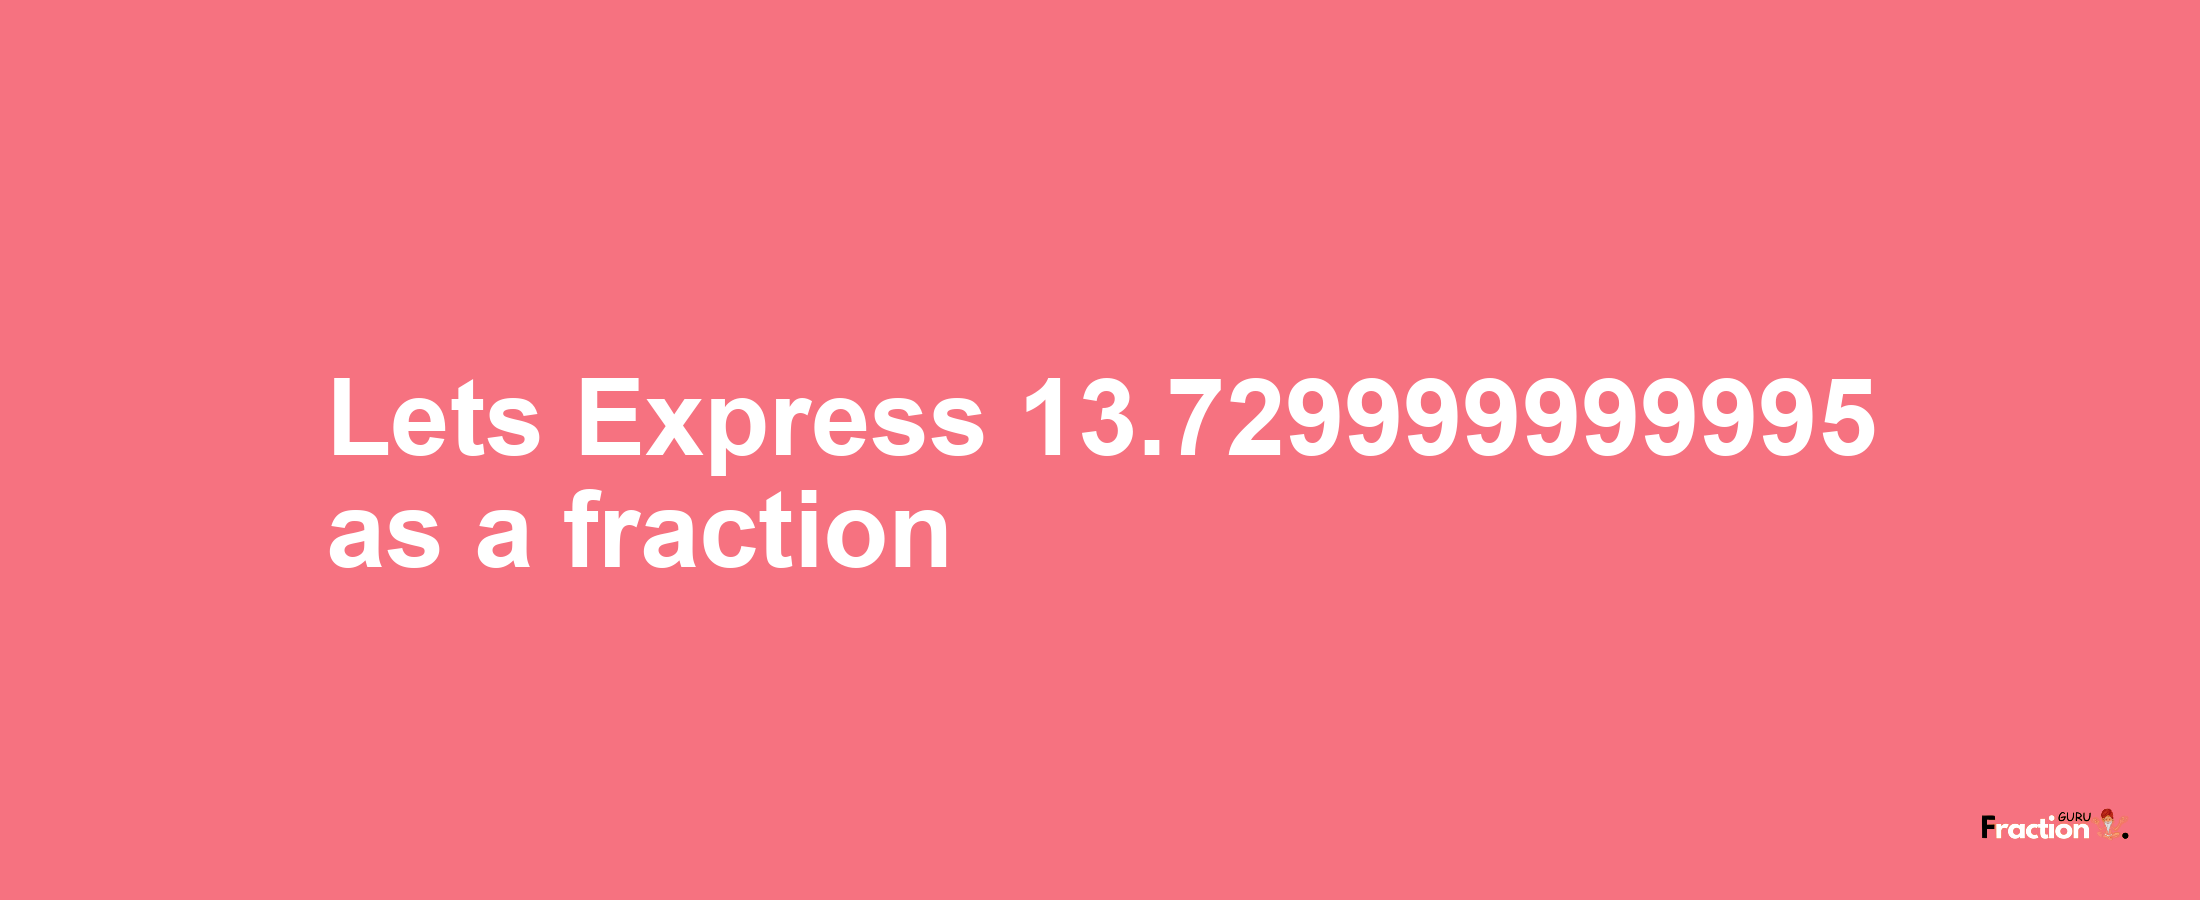 Lets Express 13.729999999995 as afraction